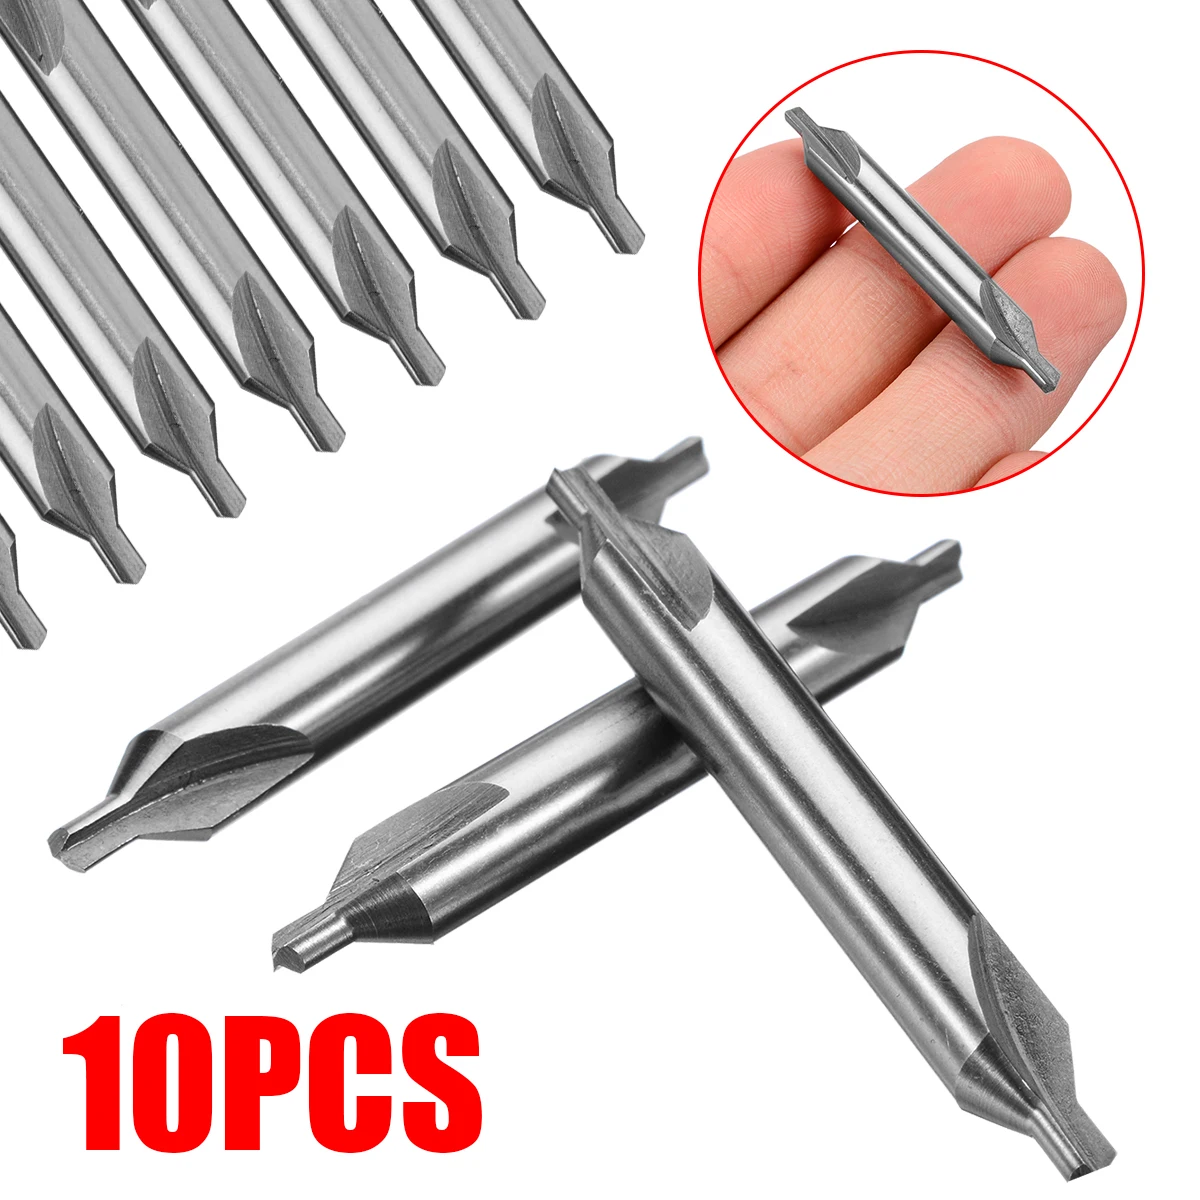 Jiyou 10pcs 60 Degree Combined Countersink Center Drills Bits 1/1.5/2/3.15/5mm High Speed Steel for Power Tools